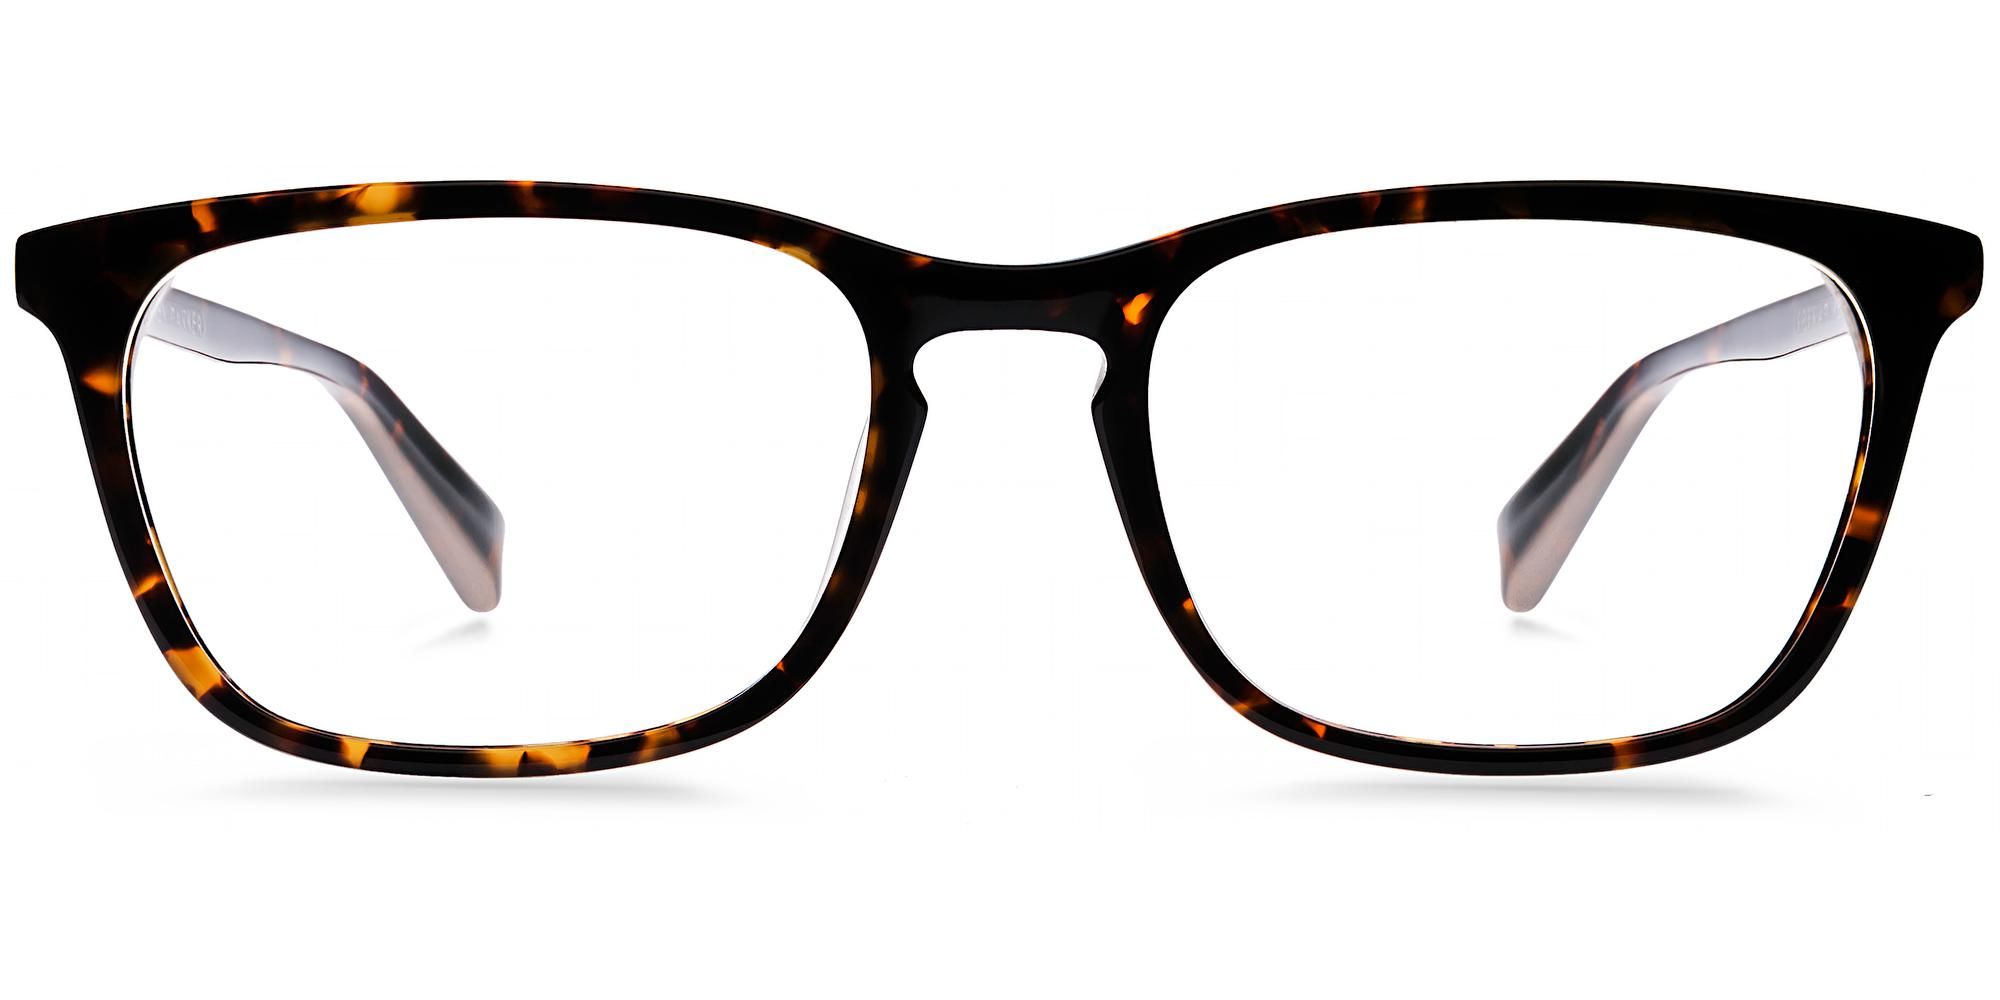 Welty Eyeglasses in Whiskey Tortoise for Women | Warby Parker